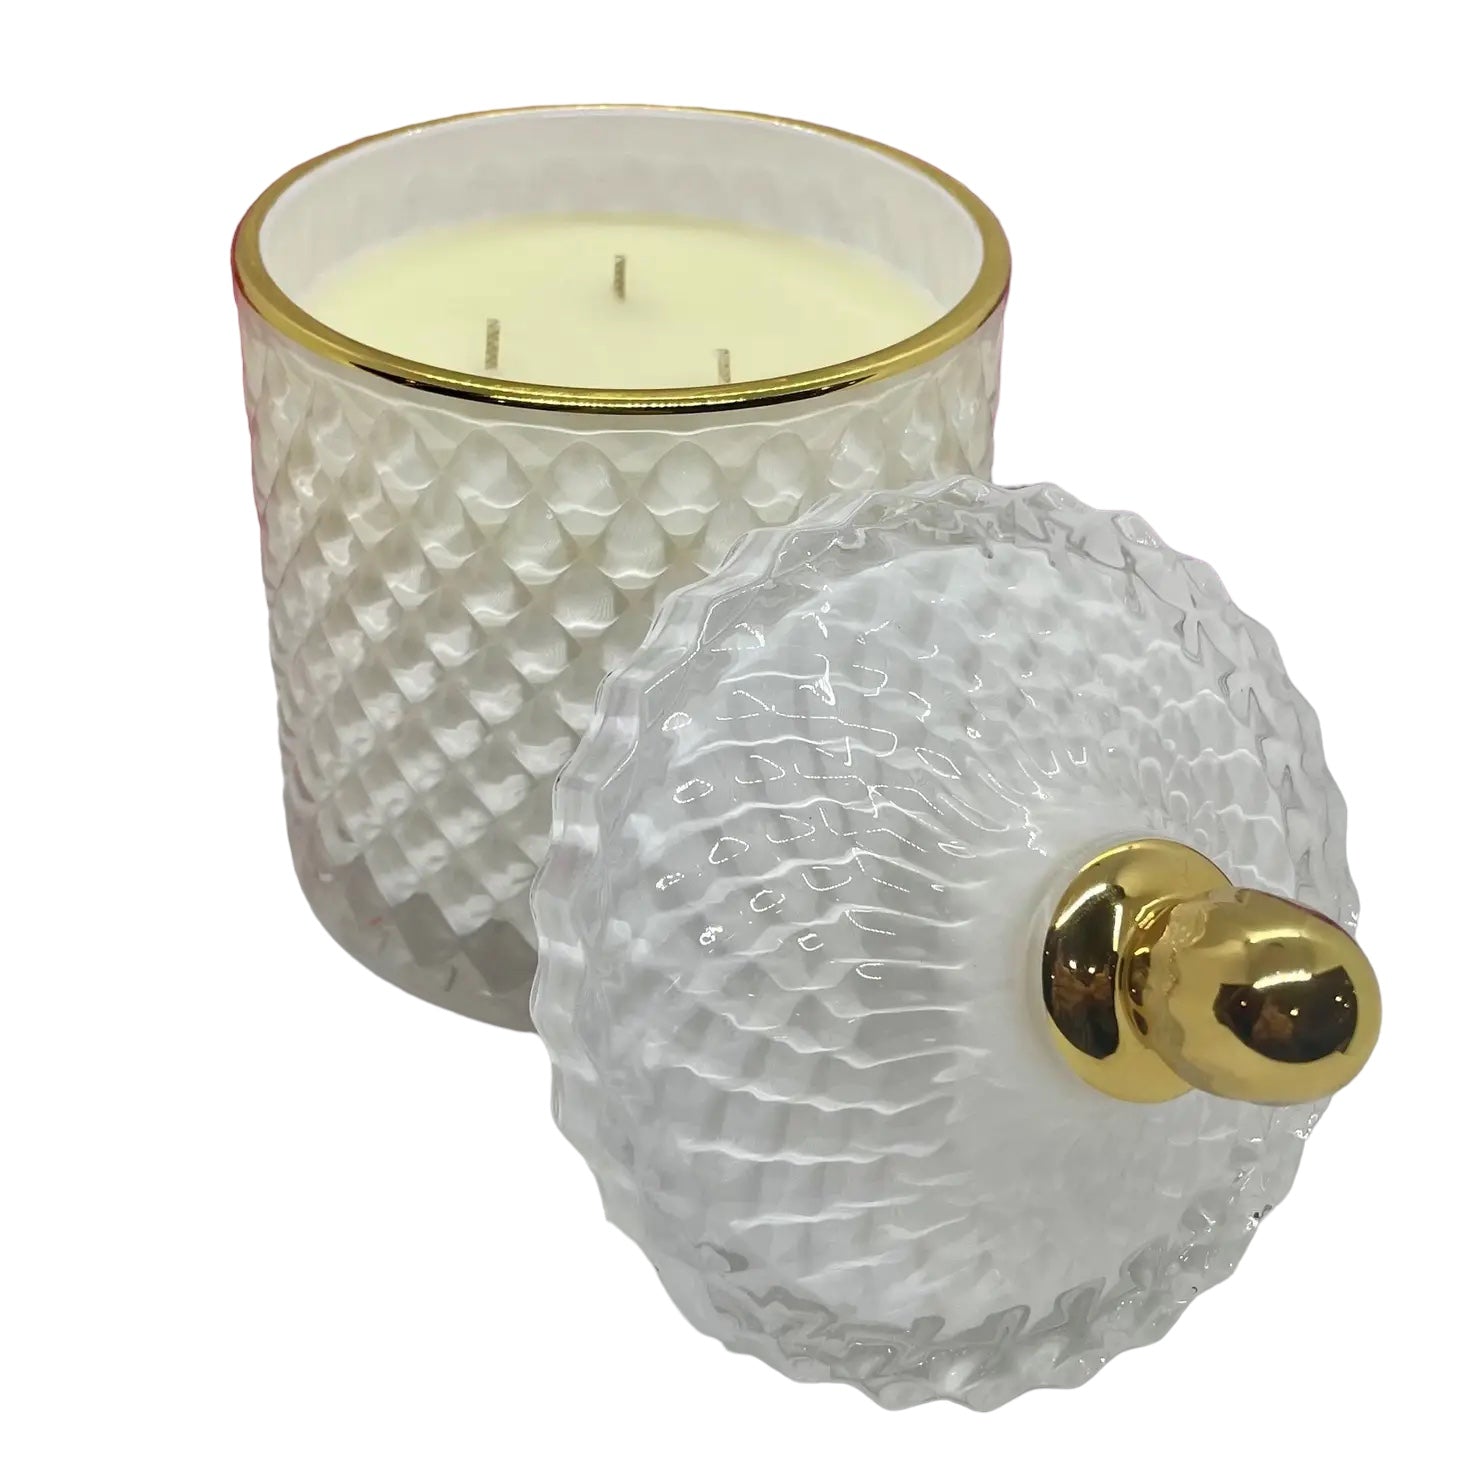 Large Soy Candle - Geo Diamond White with Gold Accents, Nilly Vanilly